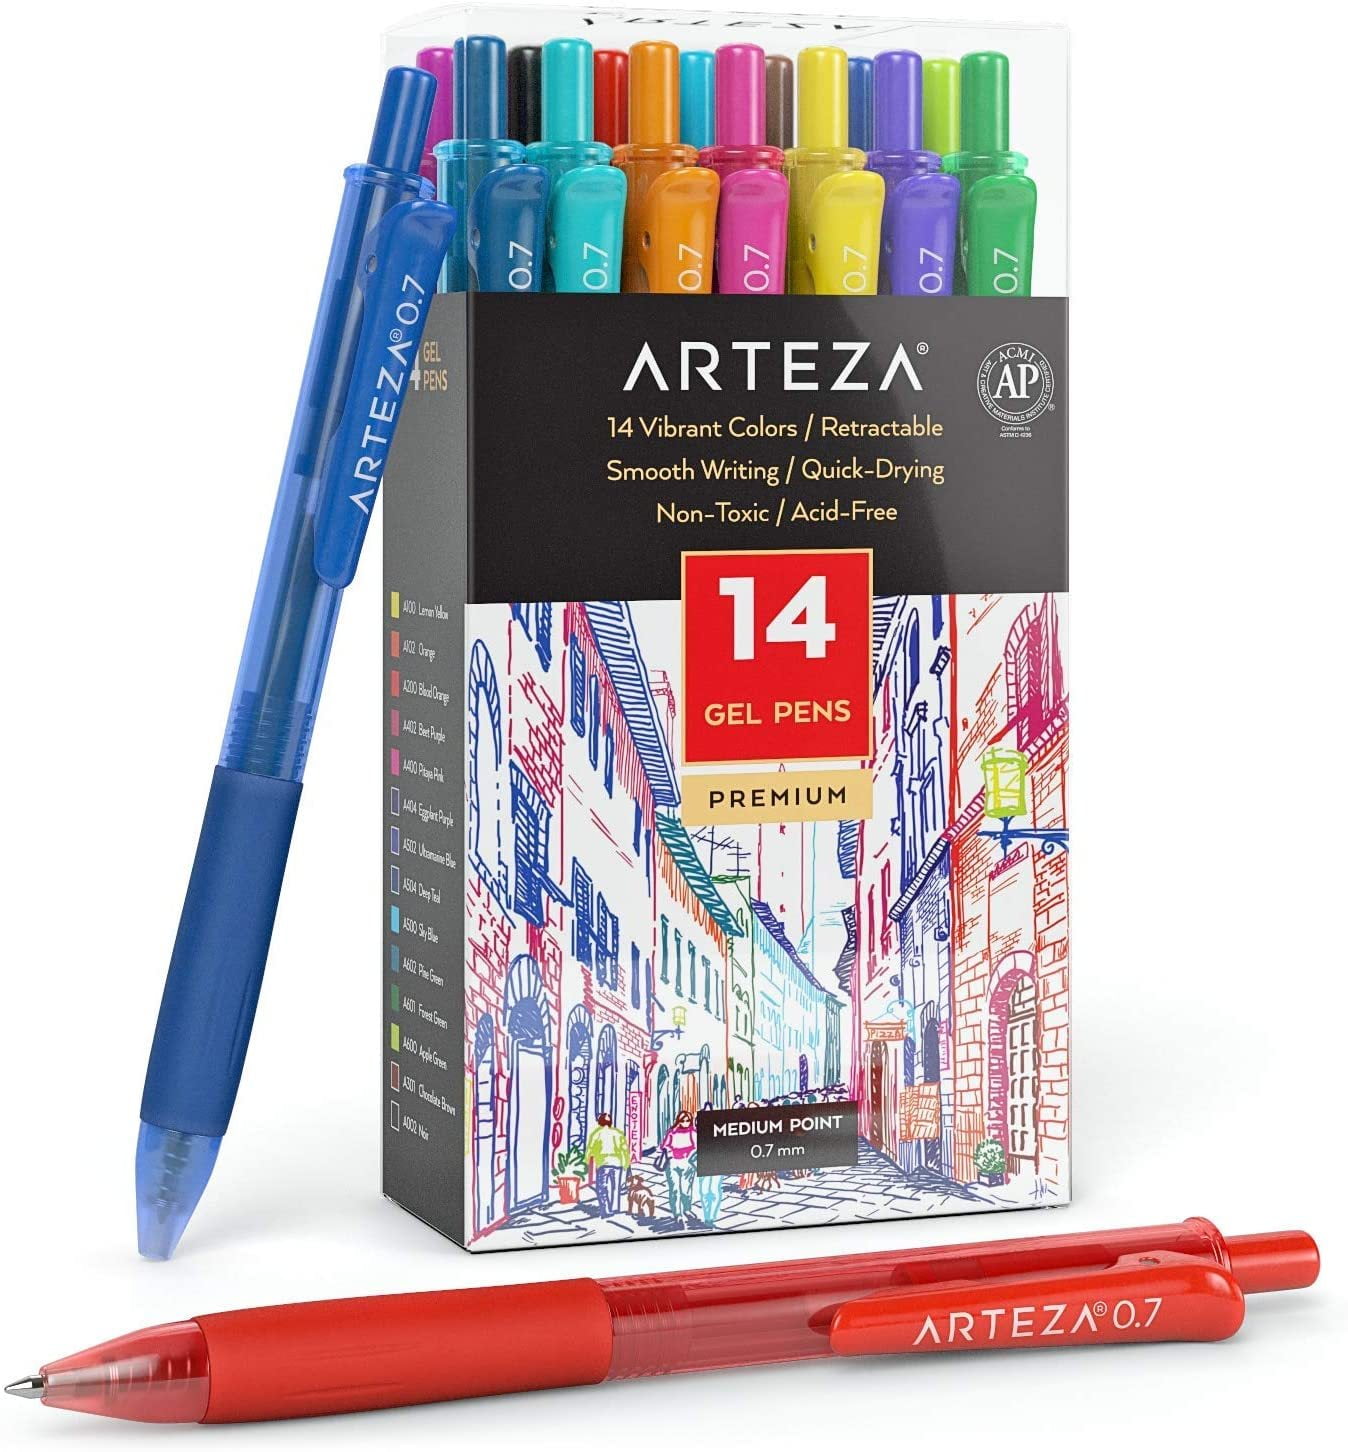 Arteza Gel Pen Set, White, 0.6mm, 0.8mm, and 1.00 mm Nibs - Doodle, Draw, Journal -12 Pack